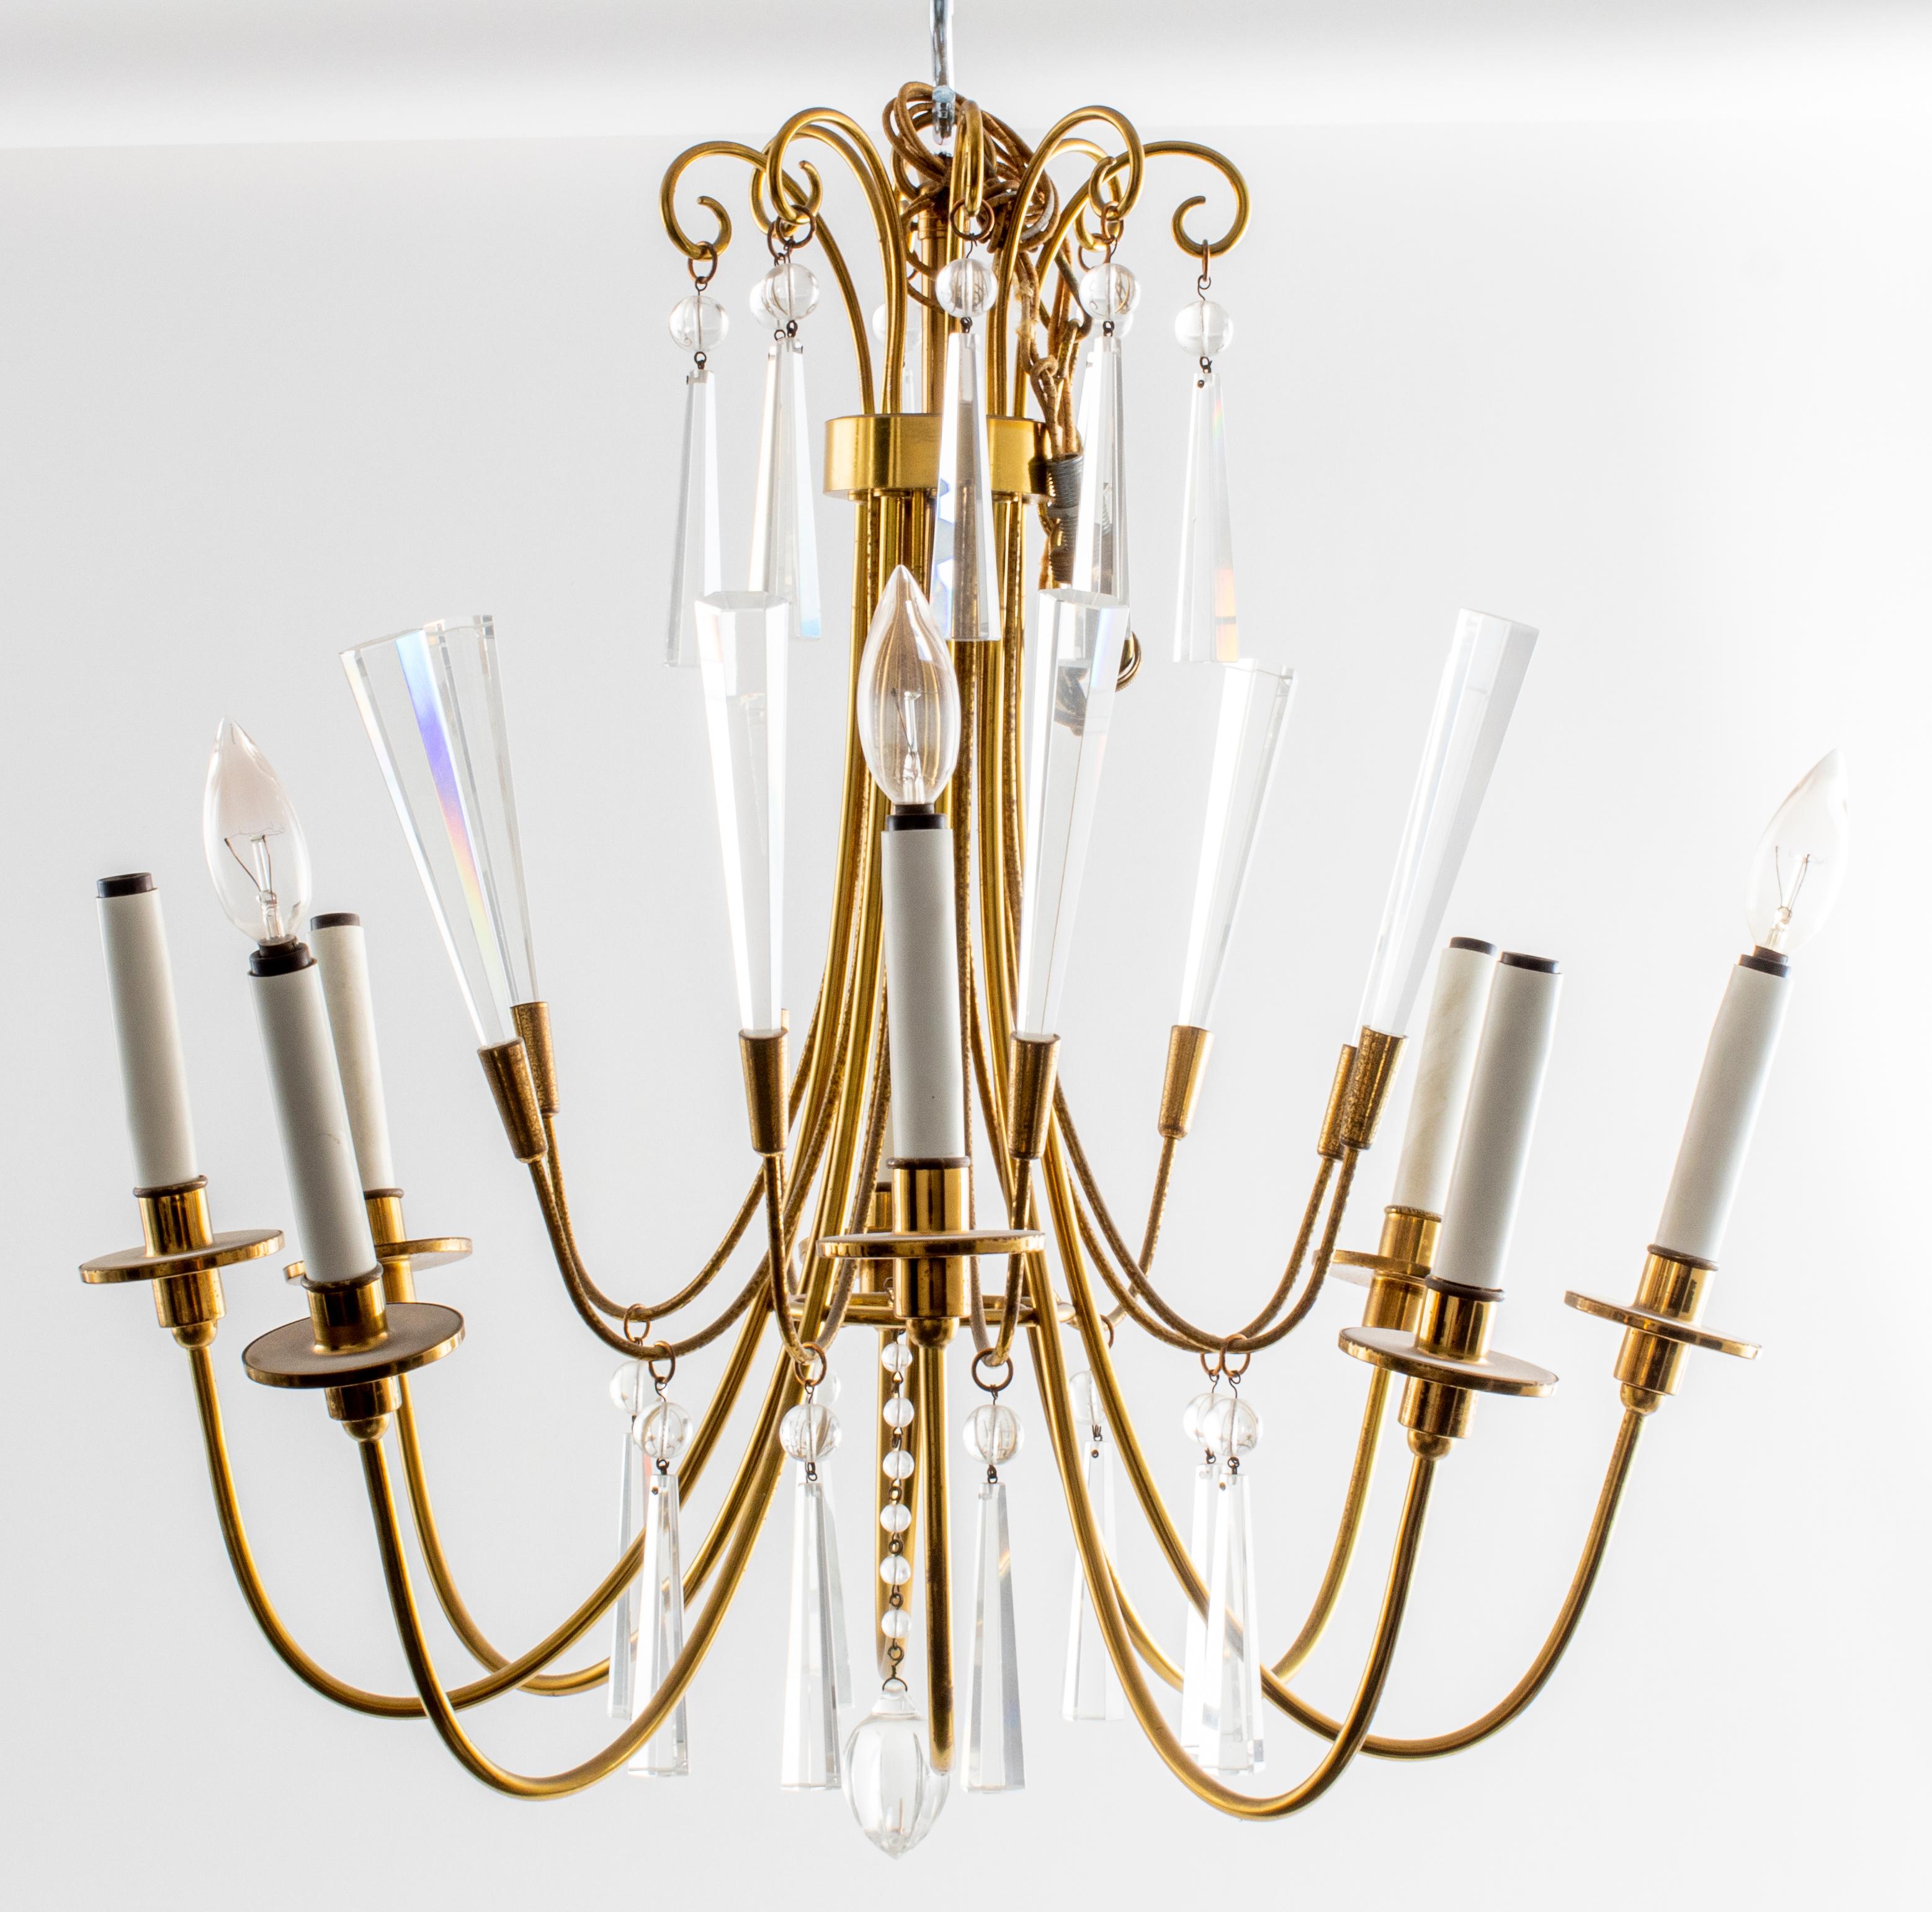 Mid-Century Modern European brass chandelier with crystal pendants and central pendant ball, likely made in Austria. 24